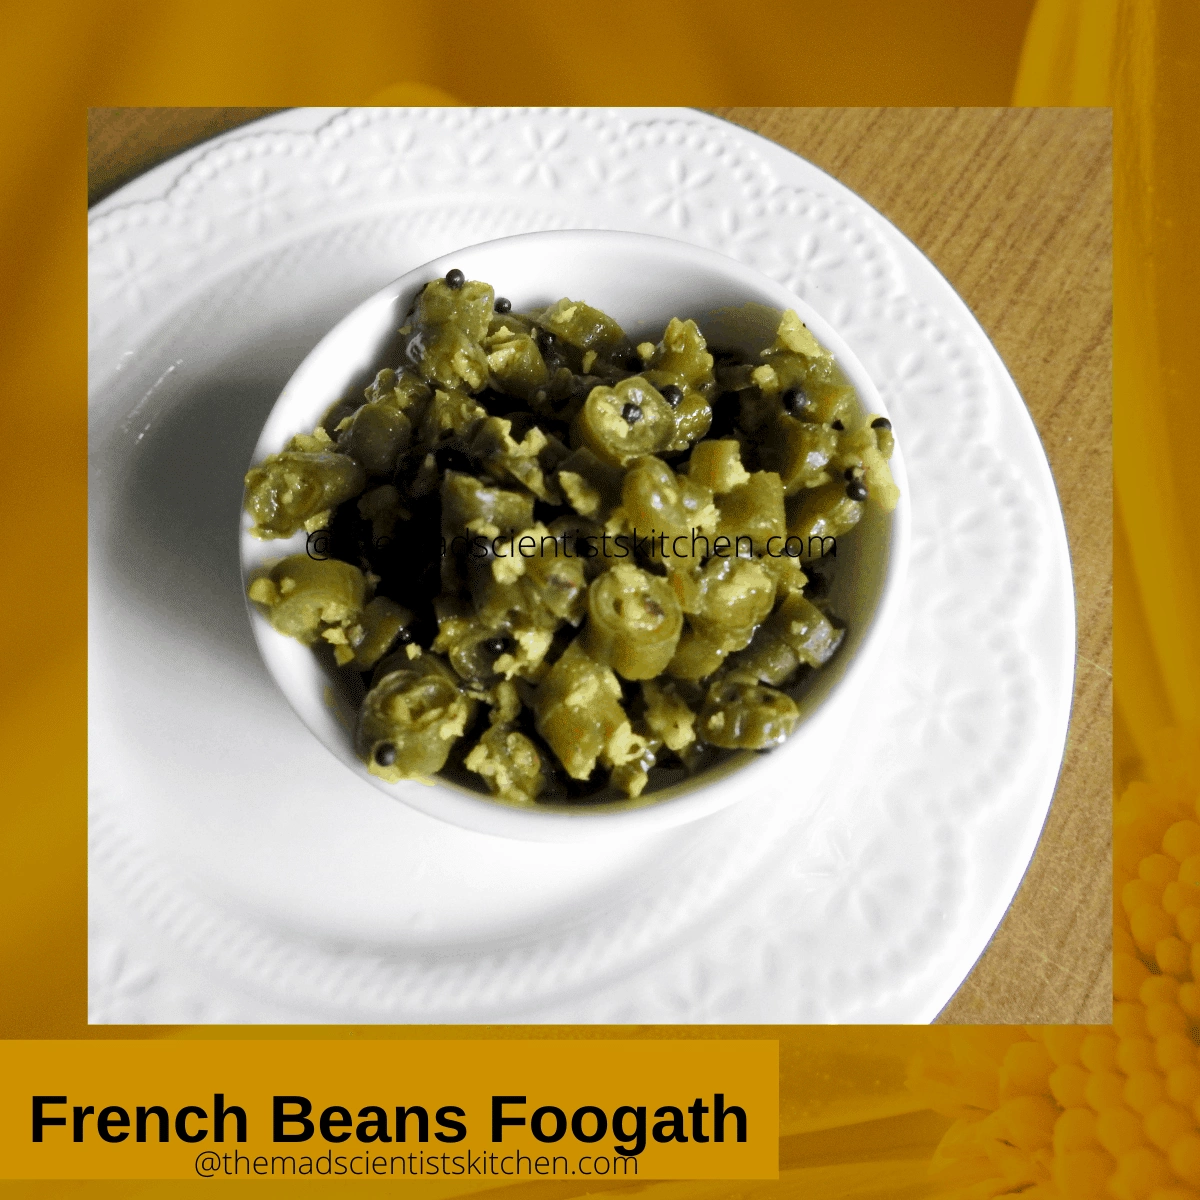 Everyday vegetable with tender French Beans